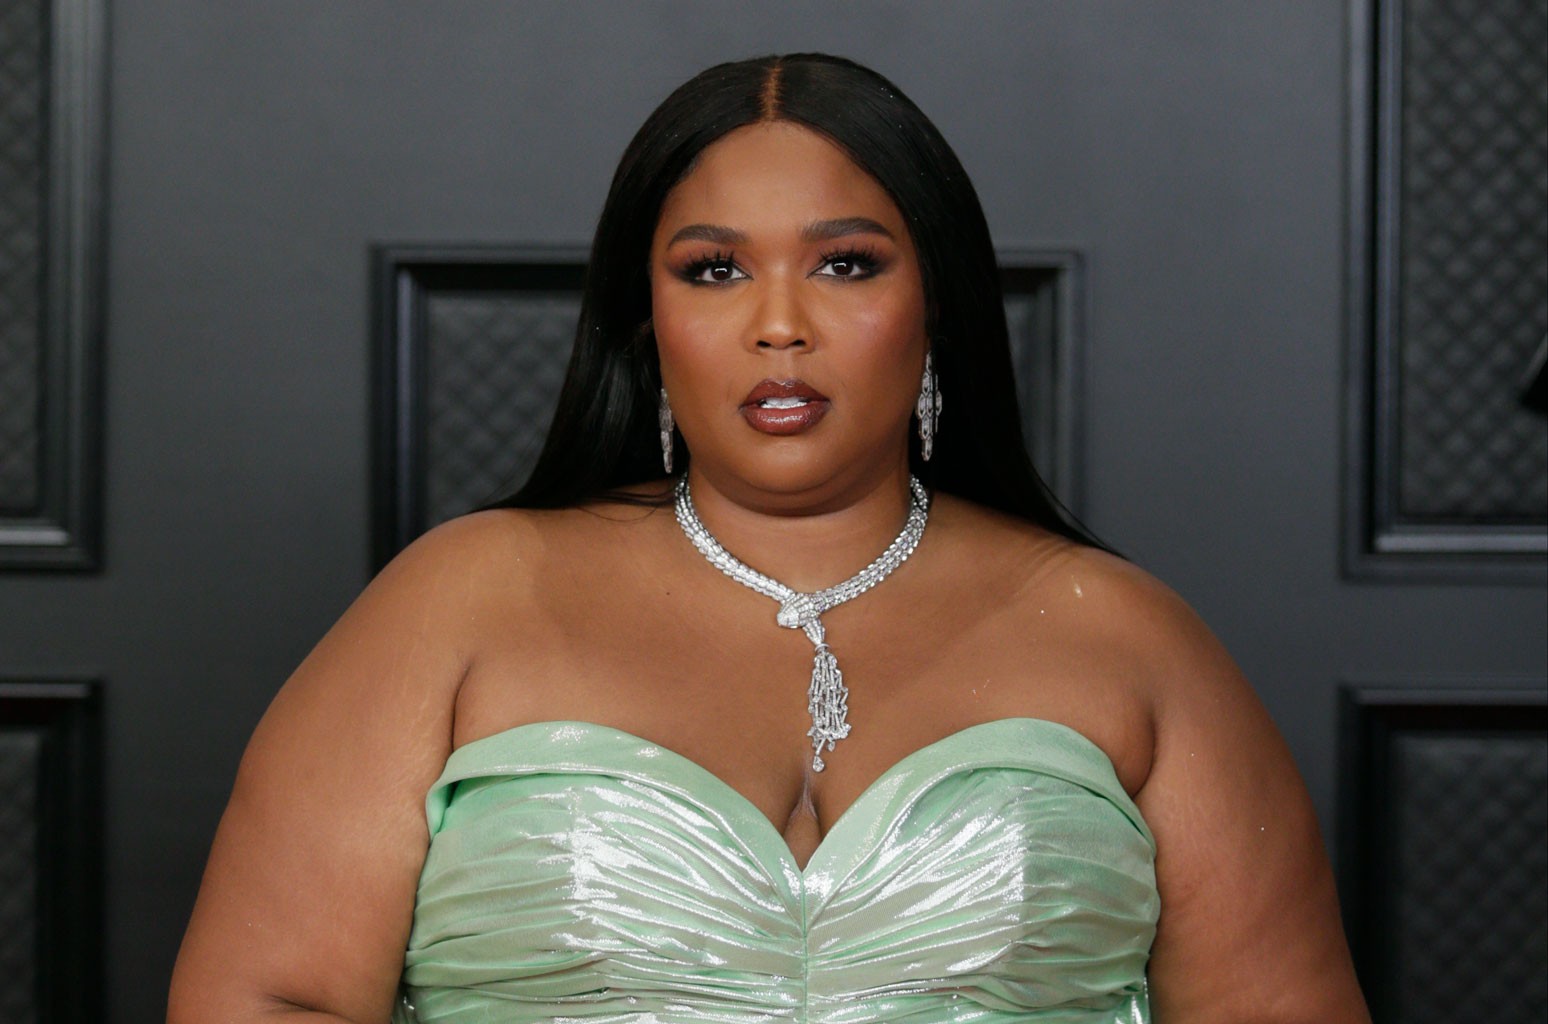 Lizzo Shares Gets Emotional Over "Fat-Phobic" and "Racist" Comments